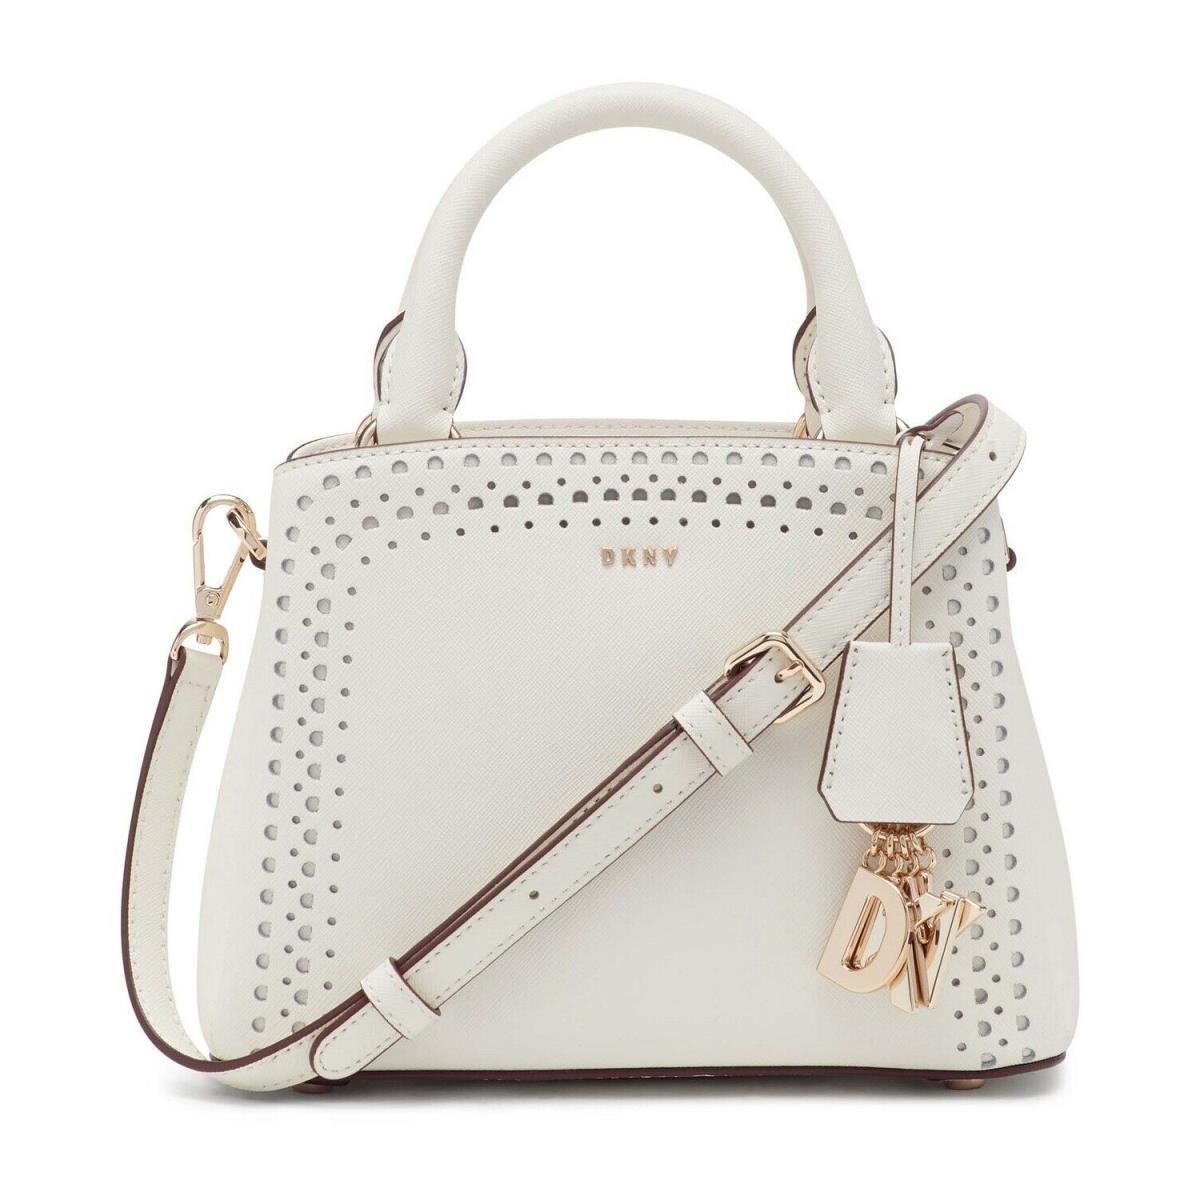 Dkny Paige Small Leather Satchel White